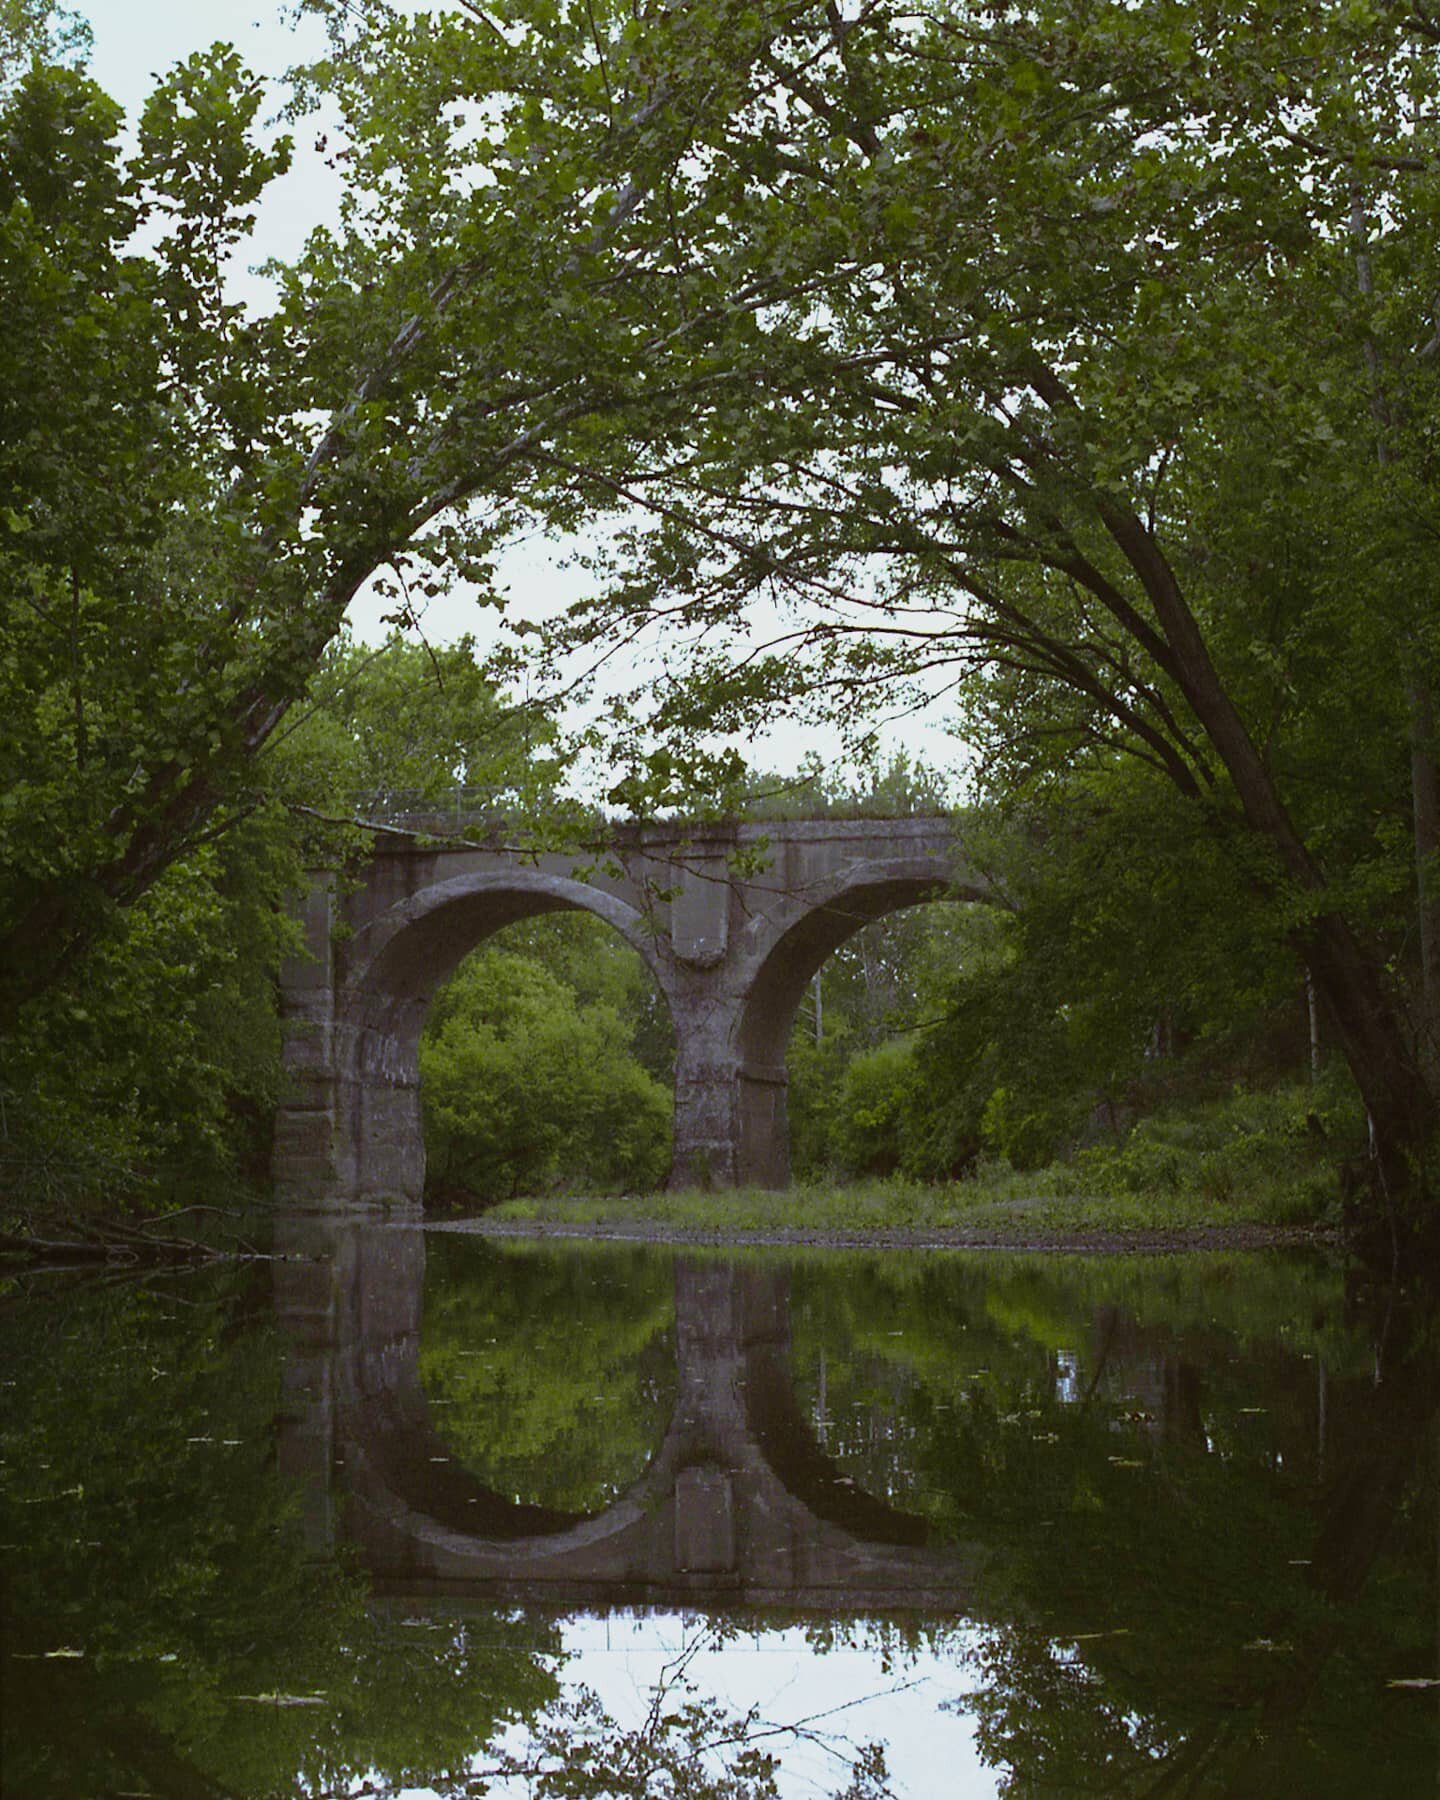 Once upon a random hike, an old bridge showed up. Can you believe that?
.
.
.
Nikon F1  Fujifilm Pro 400H